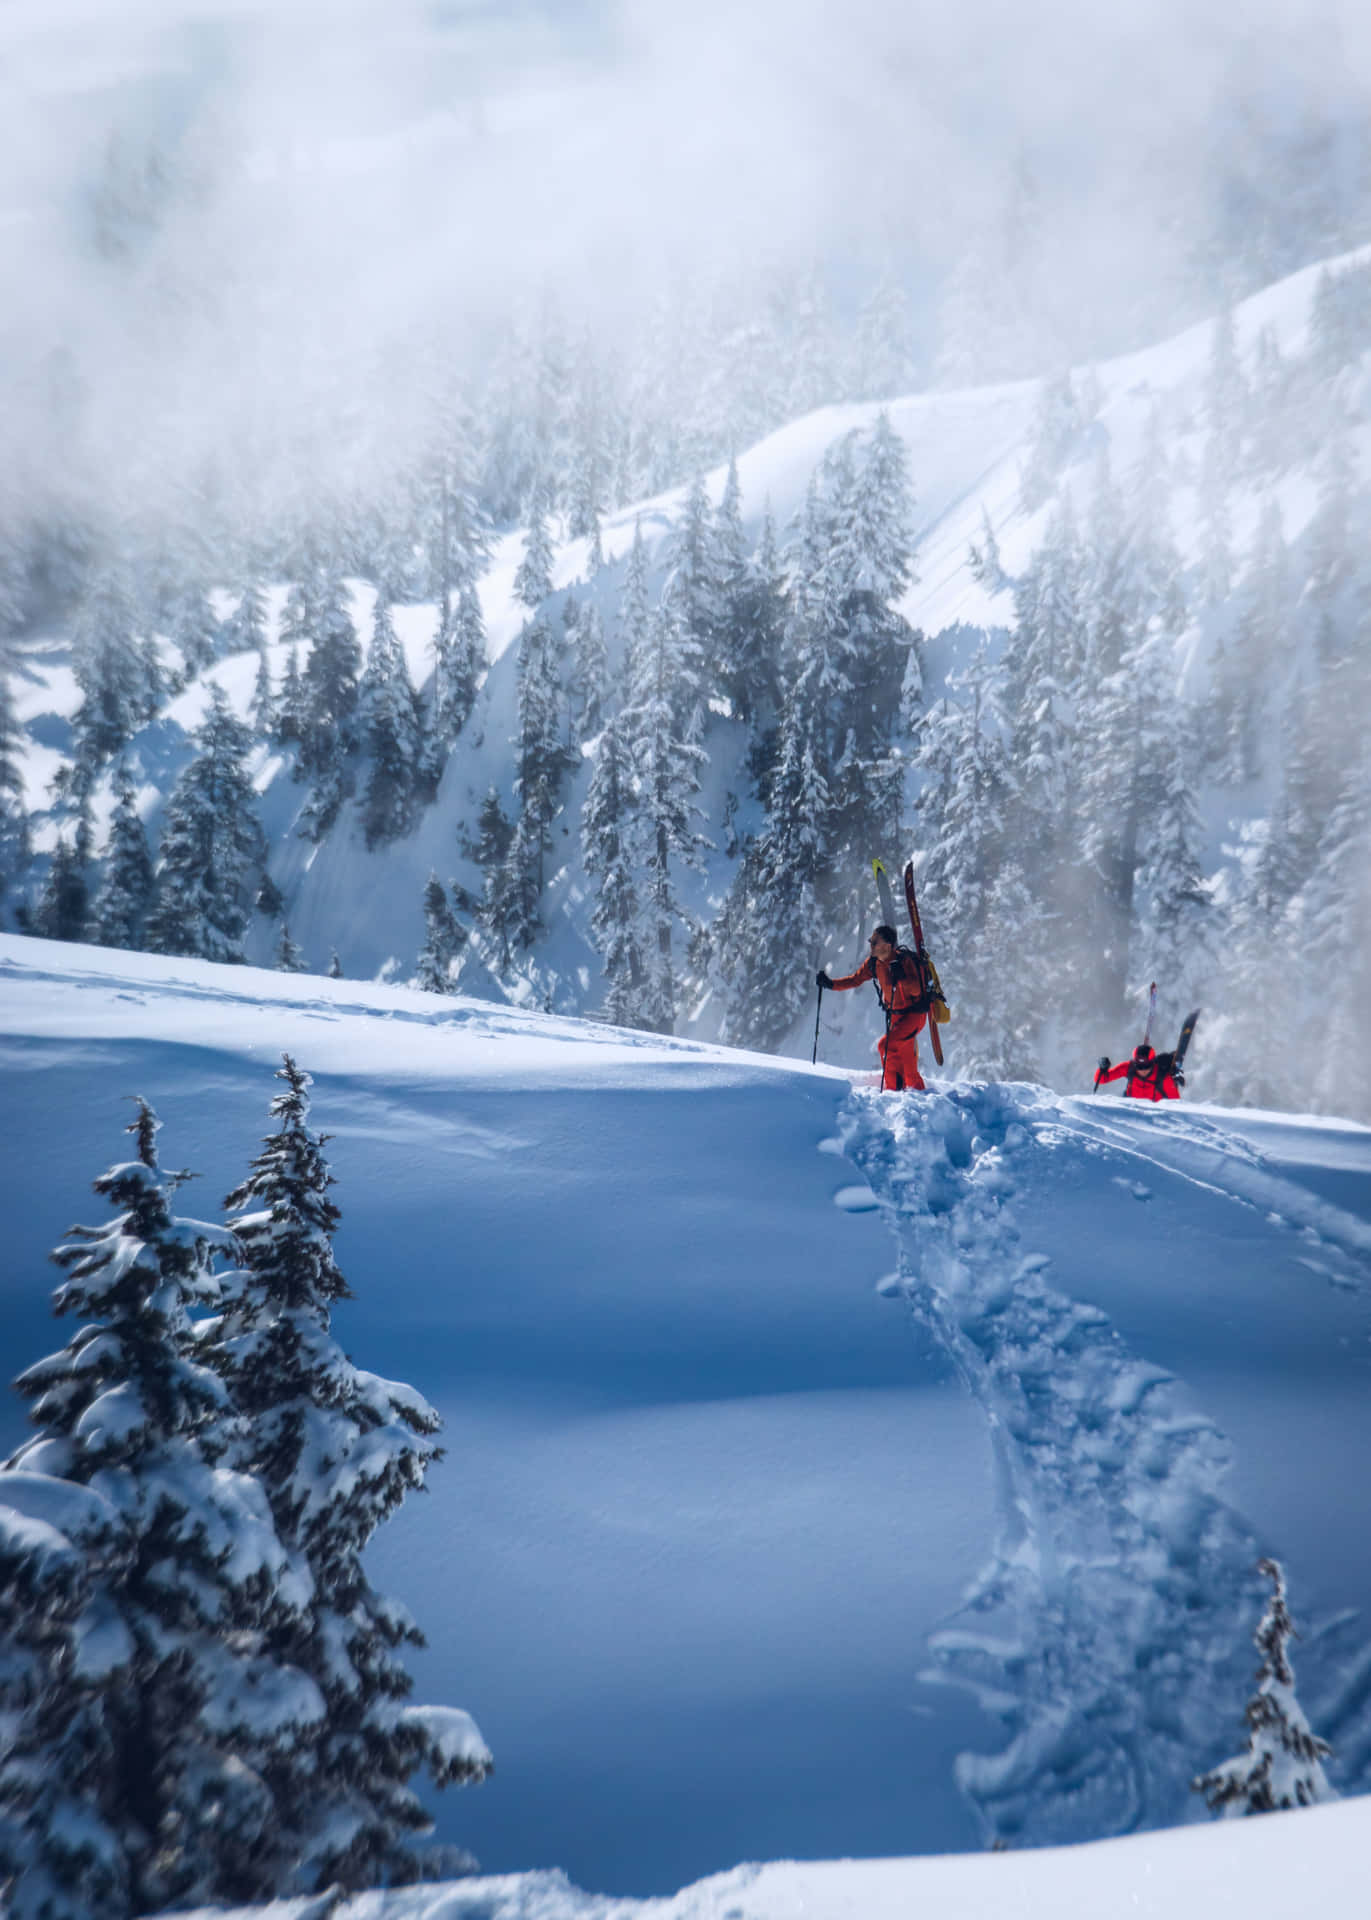 A lone skier glides down a snow-covered slope against a backdrop of scenic mountains